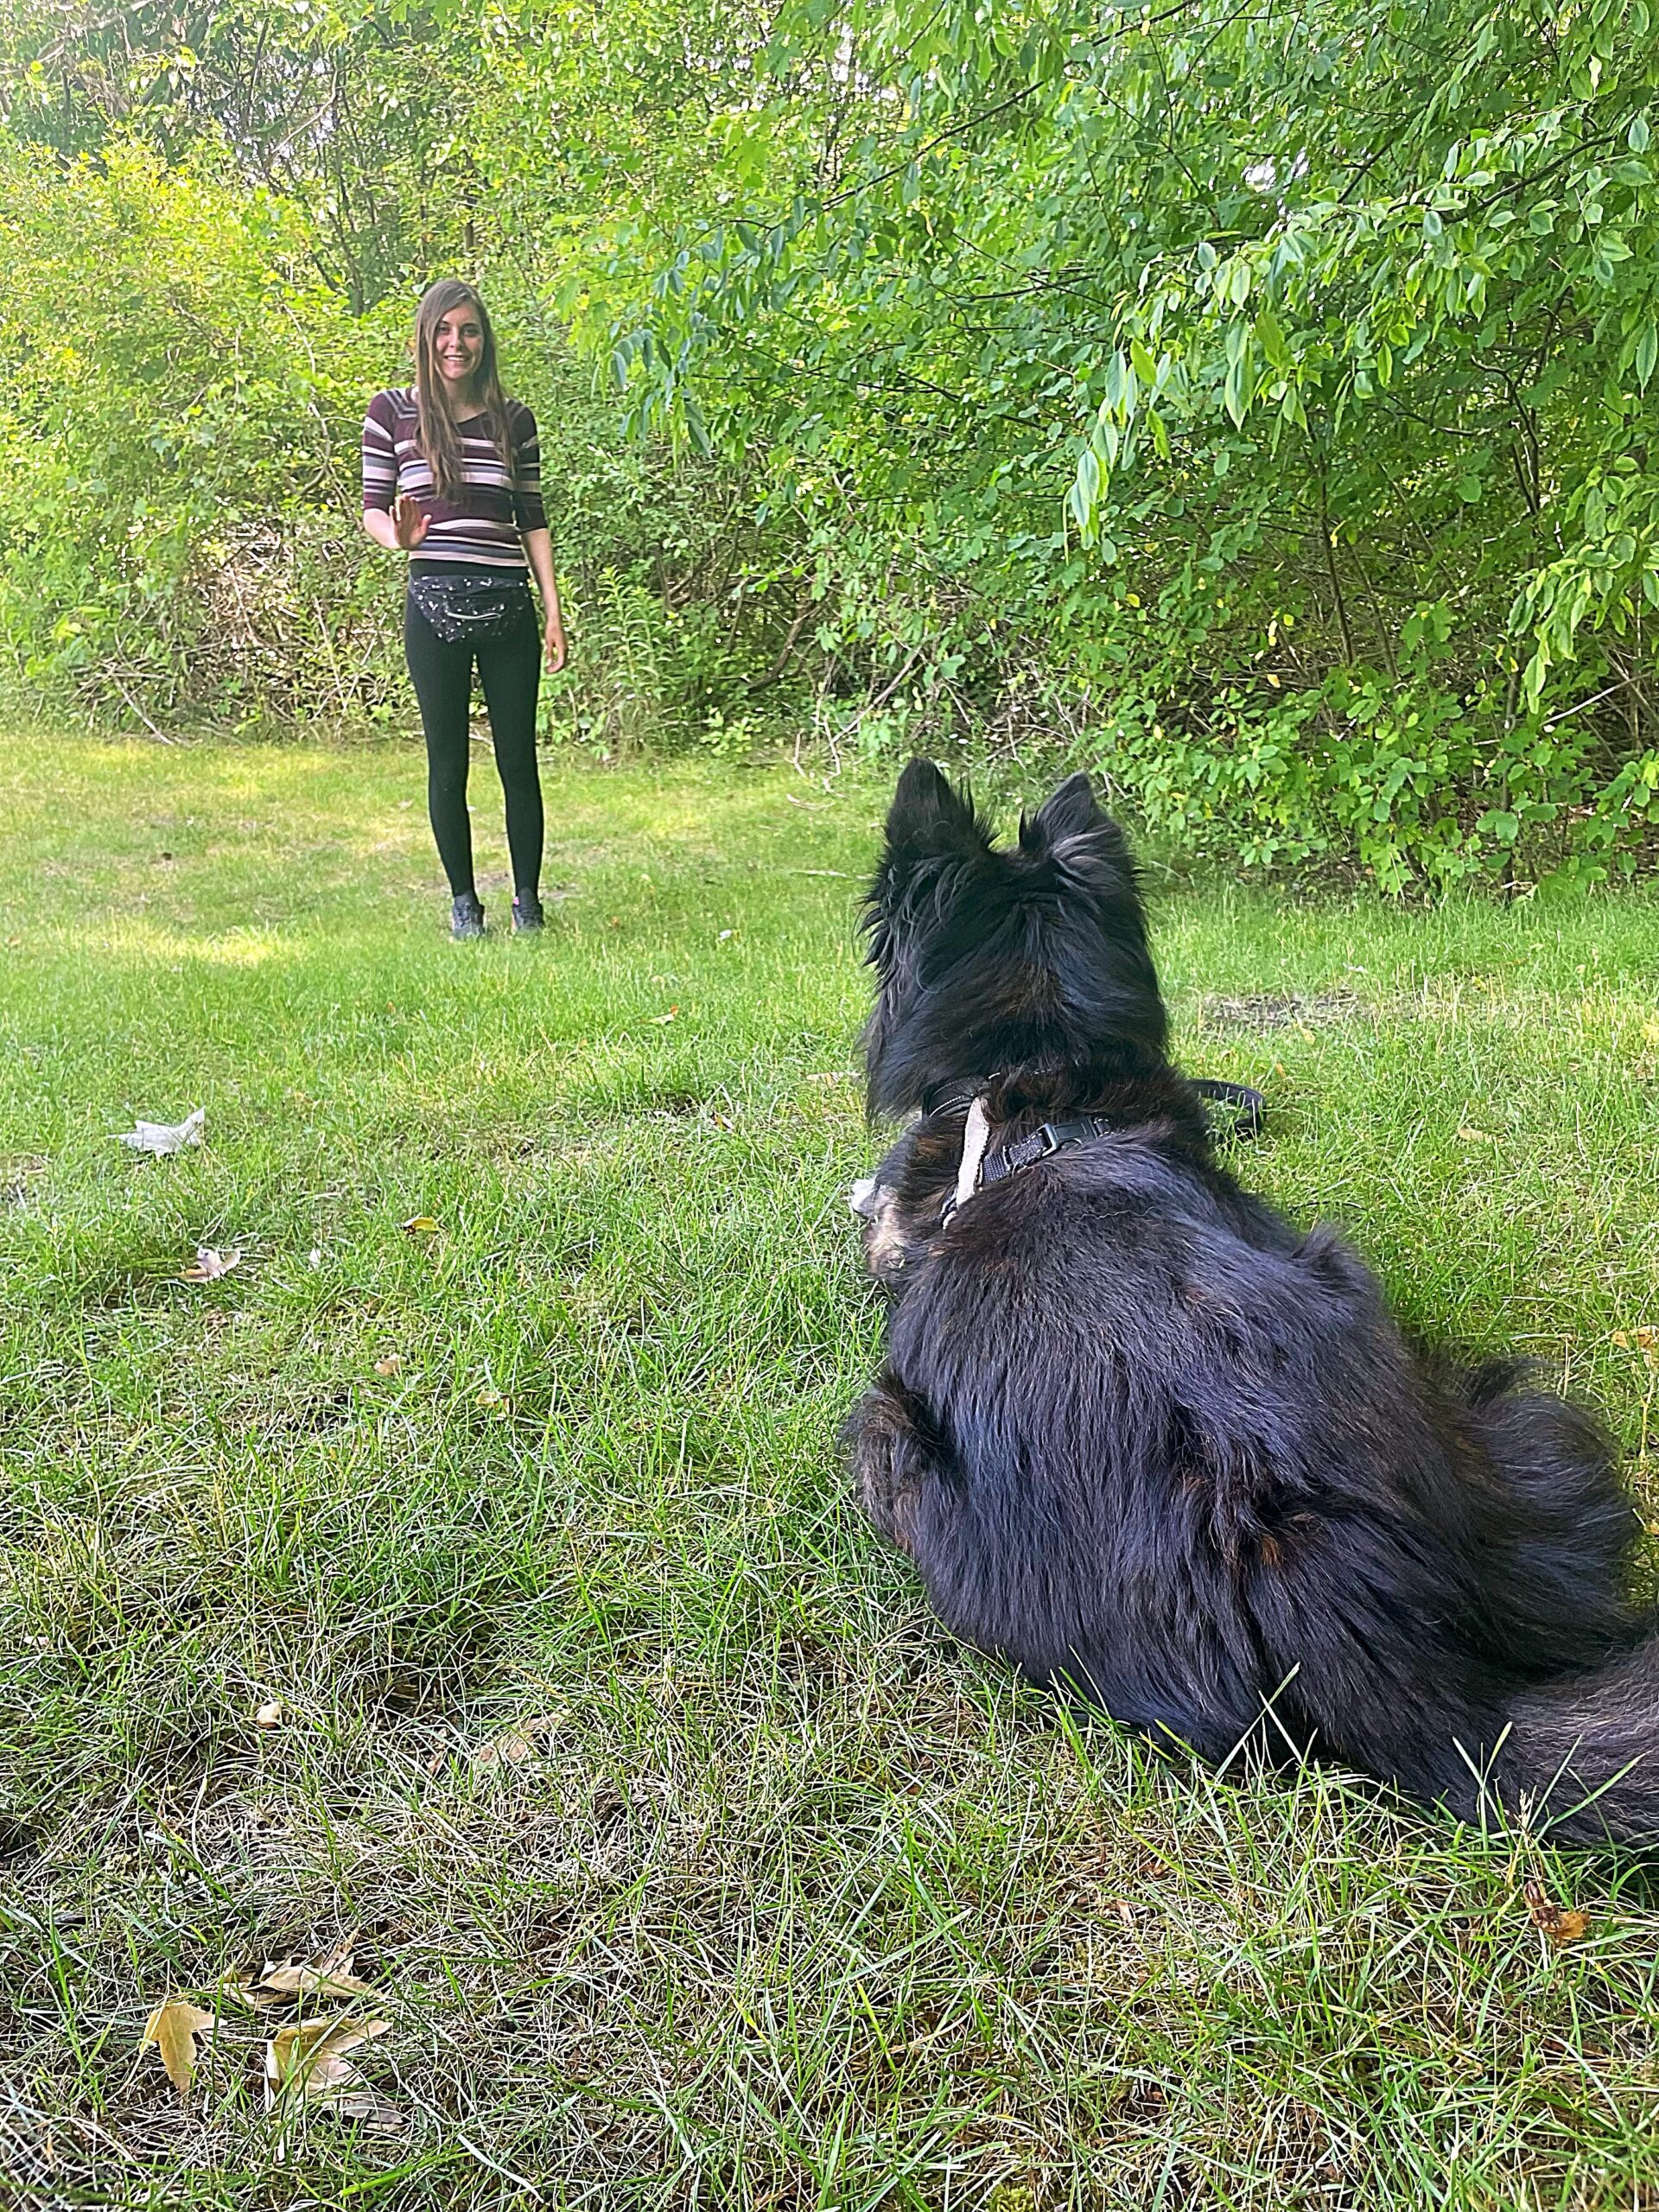 A photo showing a professional dog trainer working with a dog, using positive reinforcement techniques to train and teach cues.